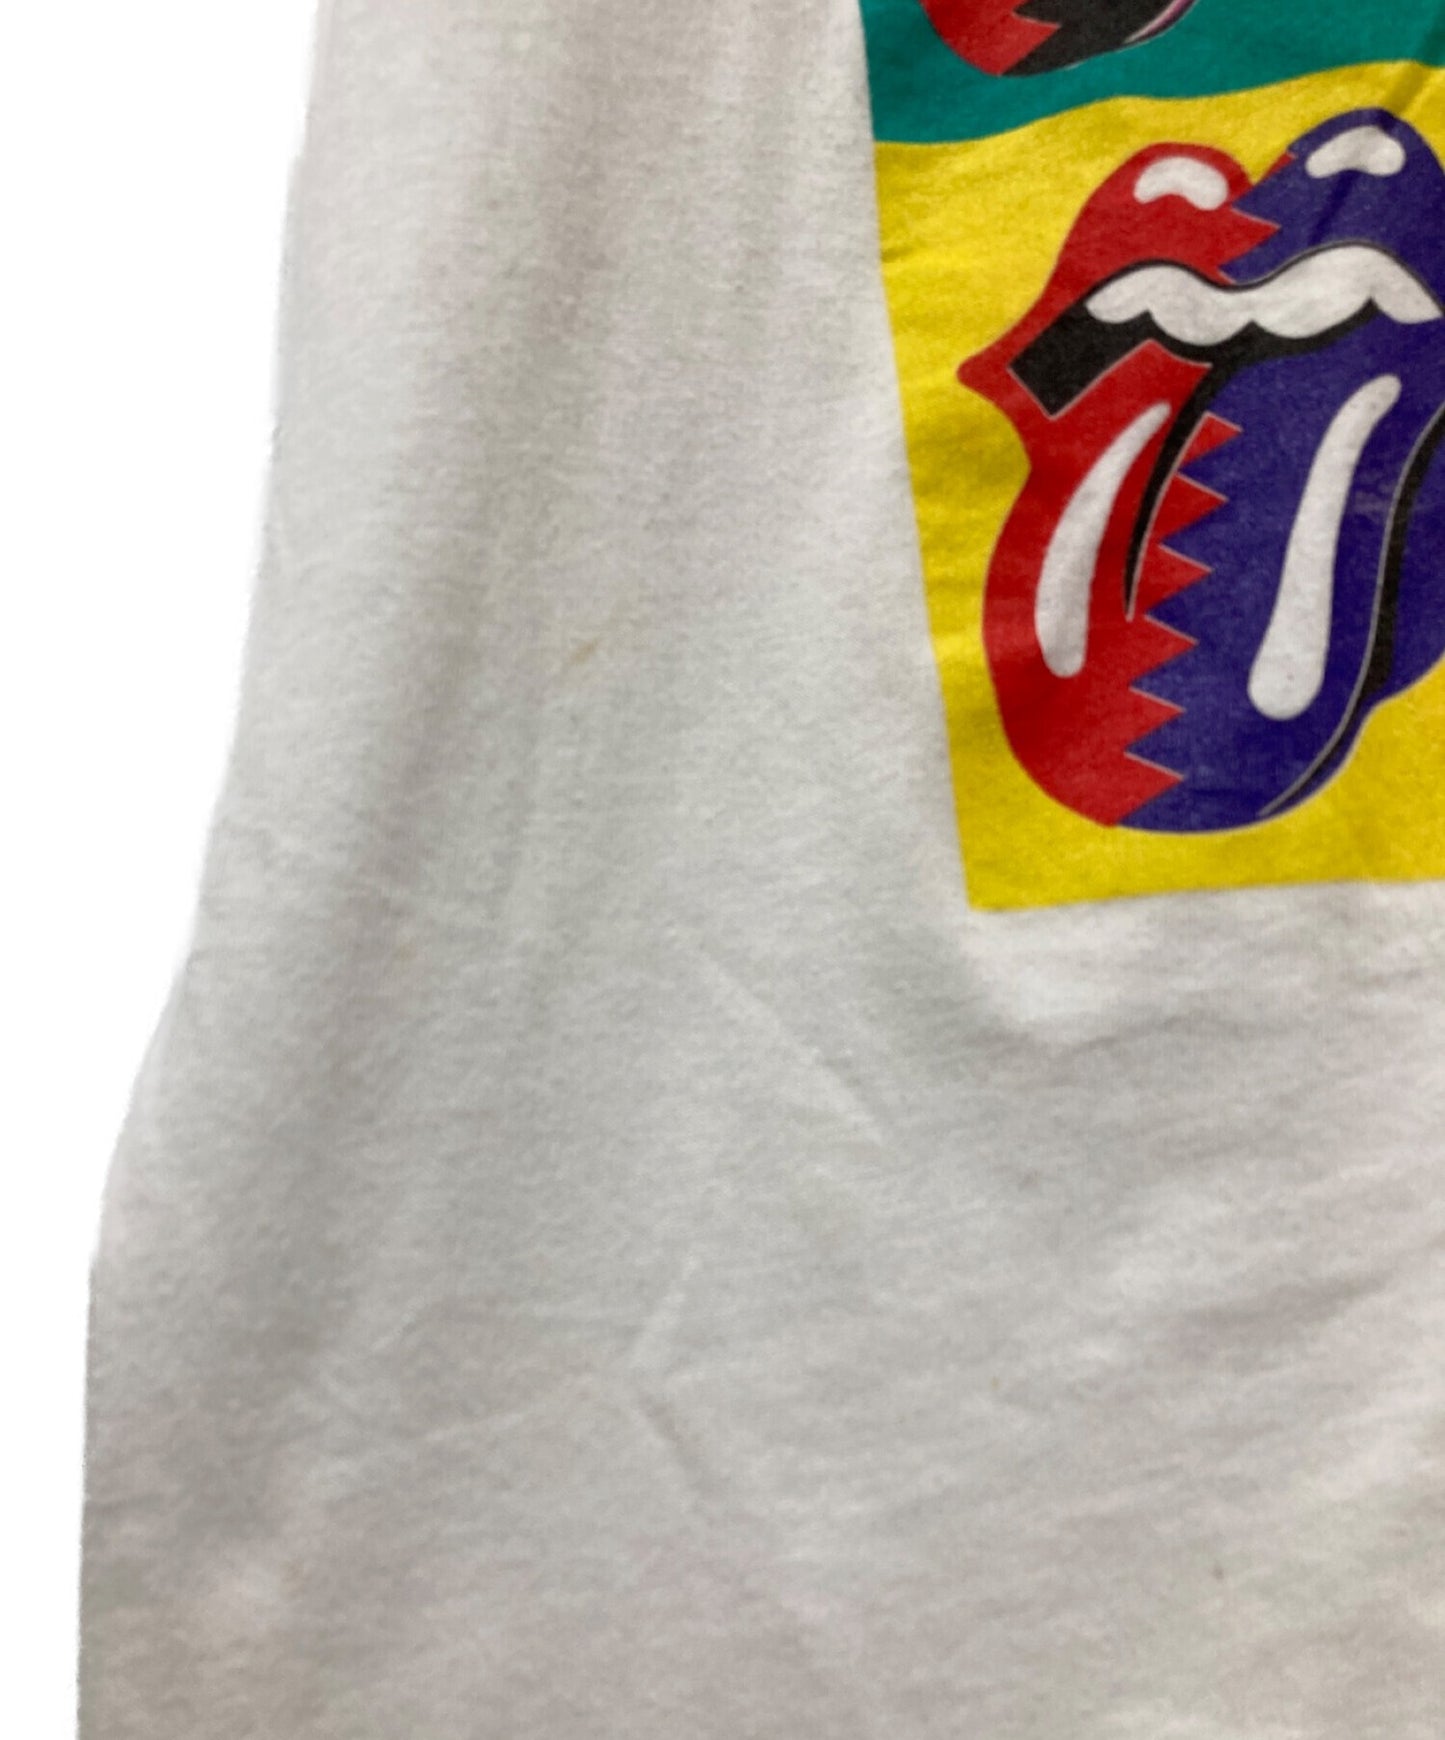 THE ROLLING STONES Band T-shirt with copyright 1989 North American Tour